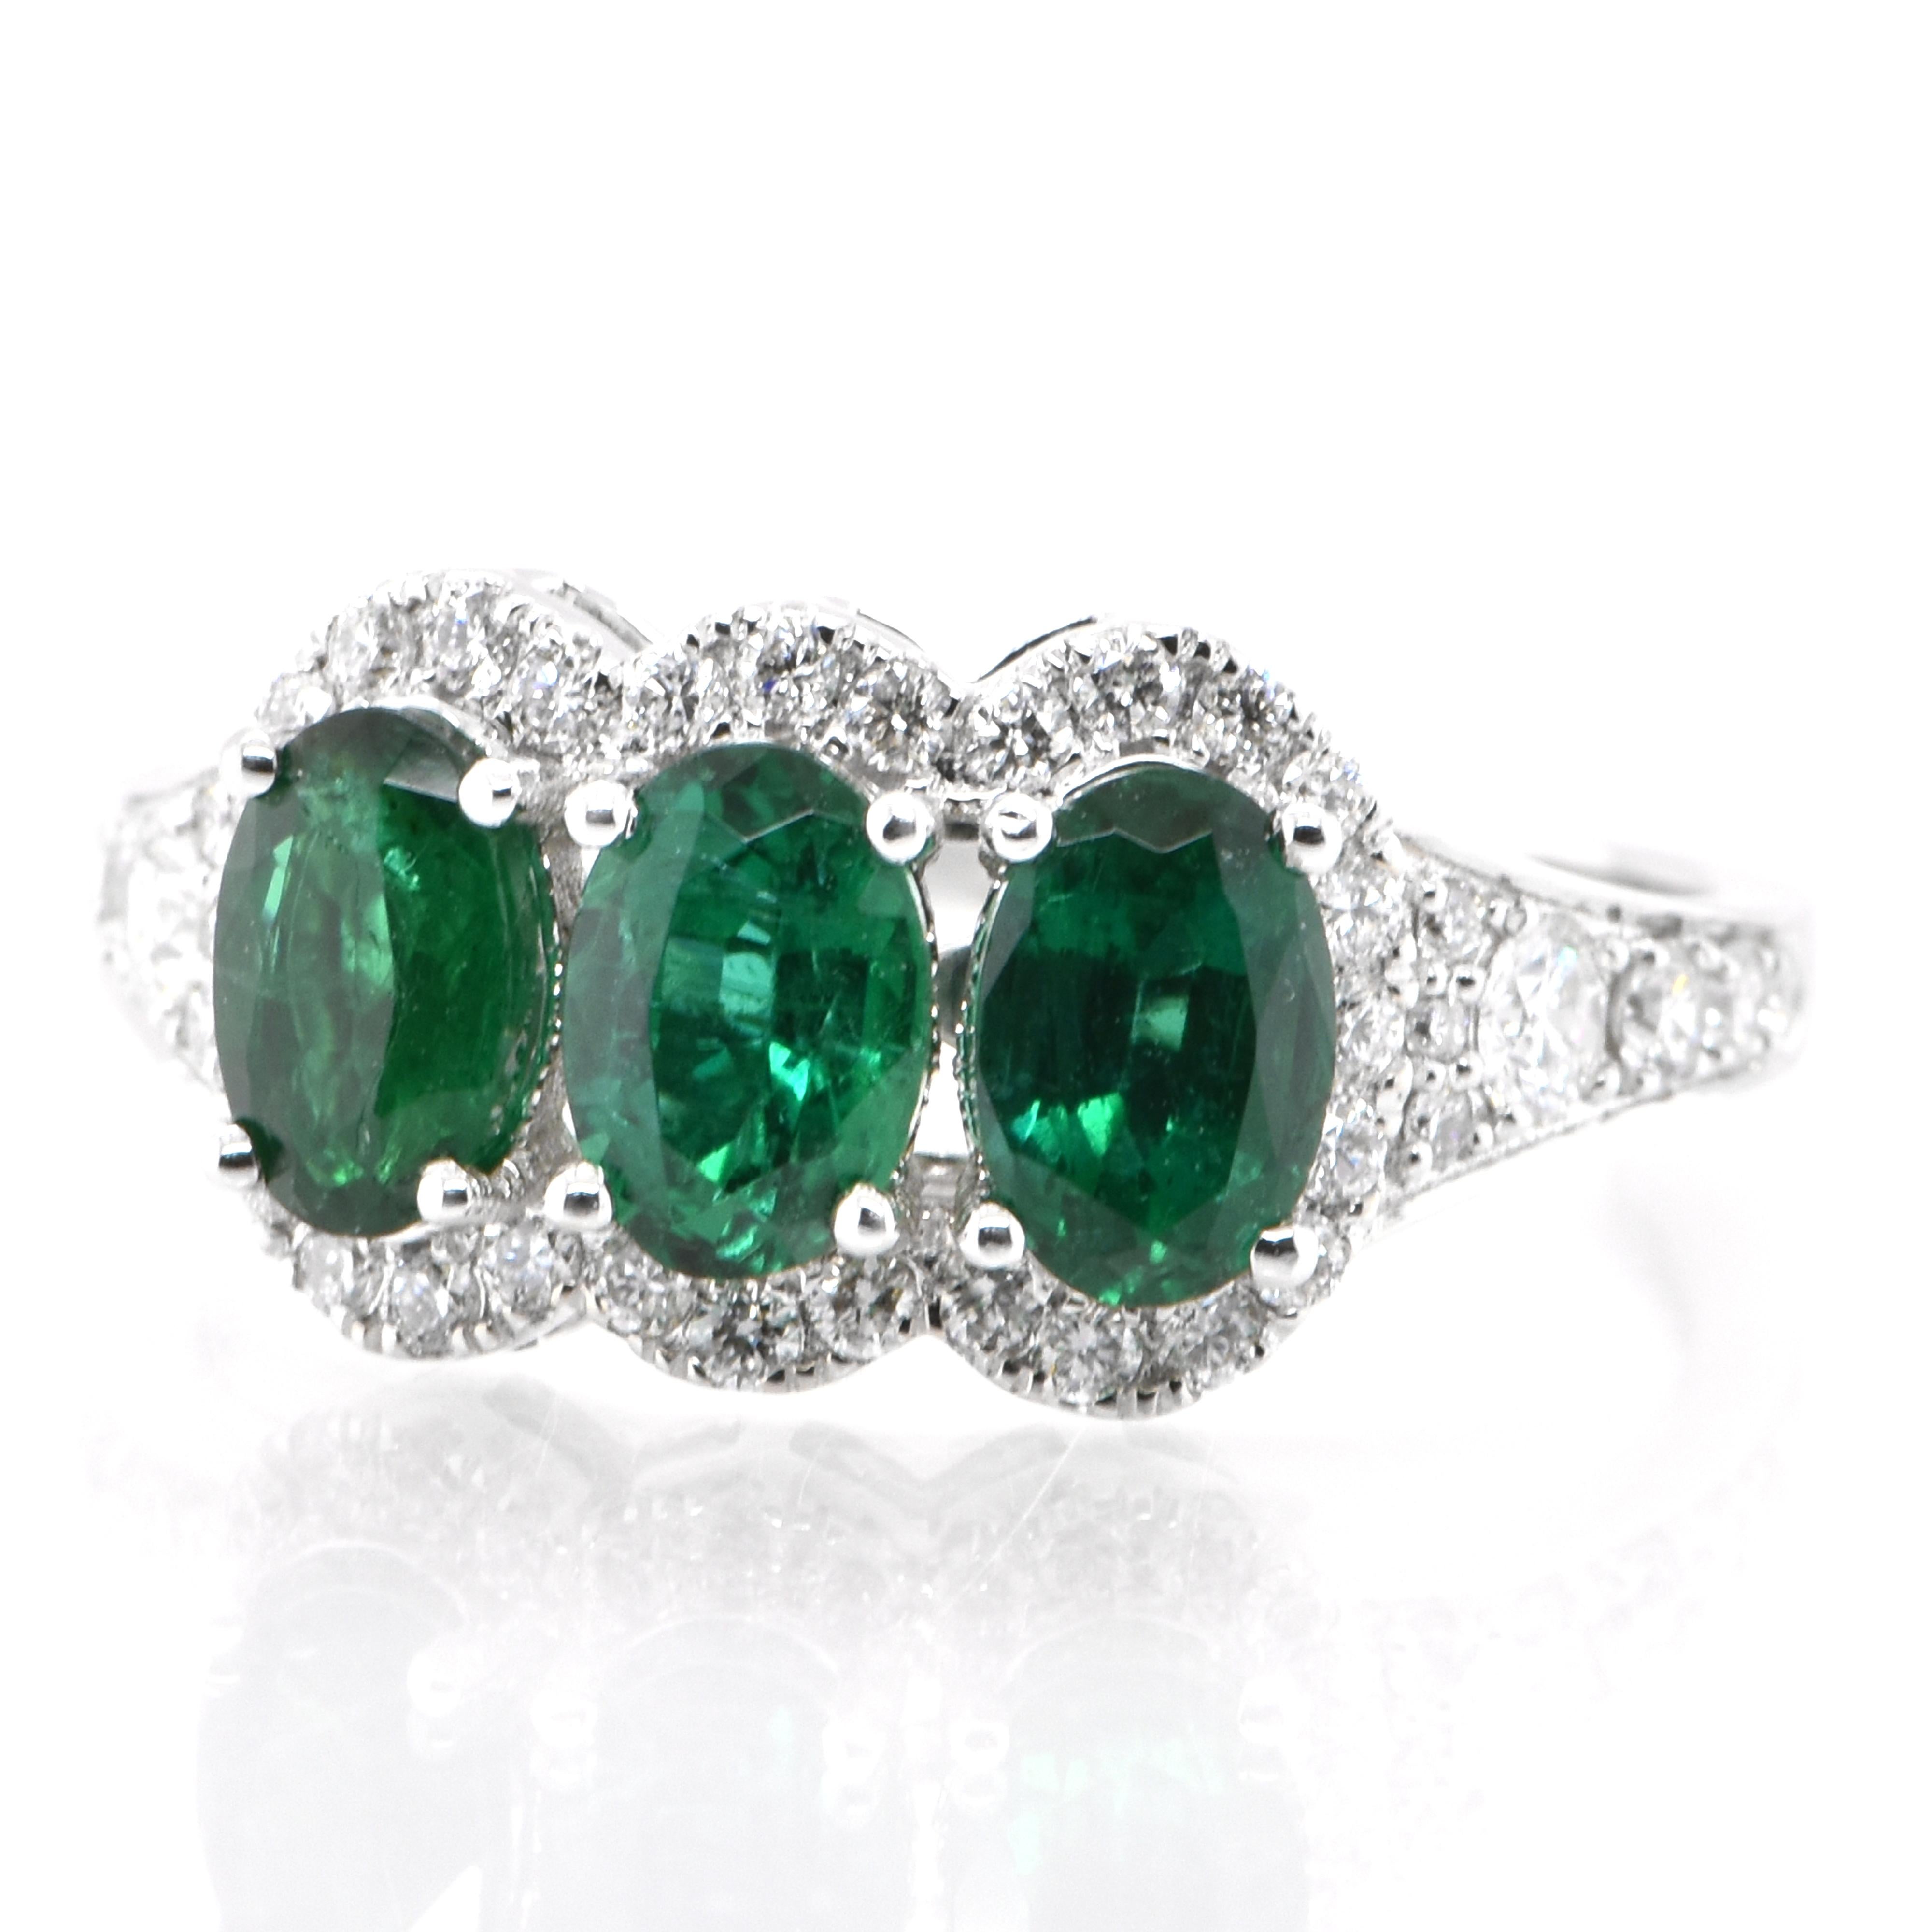 A stunning ring featuring 1.50 Carats Natural Emeralds and 0.43 Carats of Diamond Accents set in 18 Karat White Gold. People have admired emerald’s green for thousands of years. Emeralds have always been associated with the lushest landscapes and